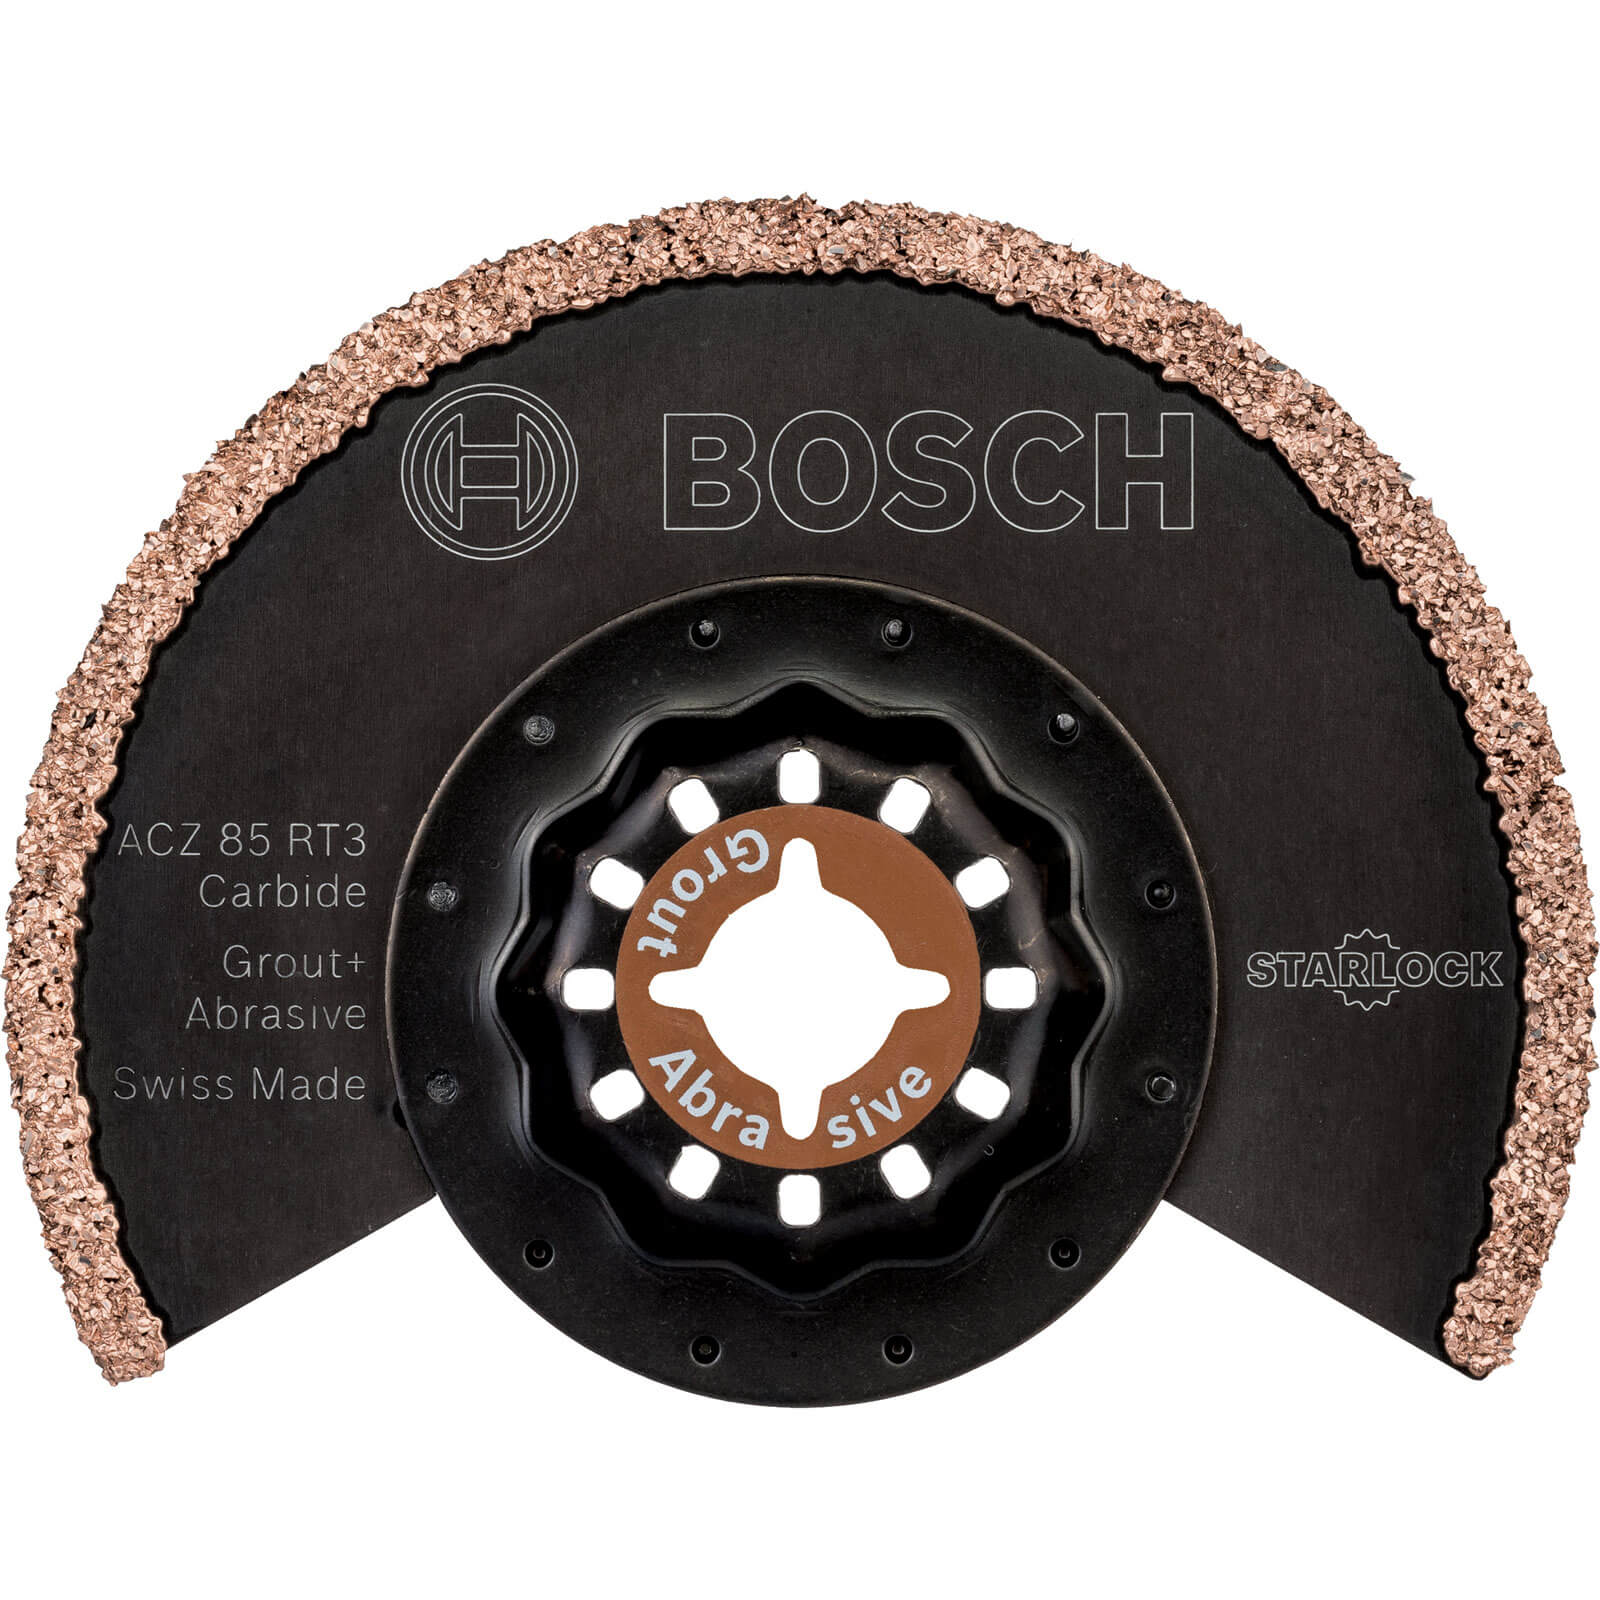 Image of Bosch ACZ 85 RT3 Grout and Masonry Oscillating Multi Tool Segment Saw Blade 85mm Pack of 1